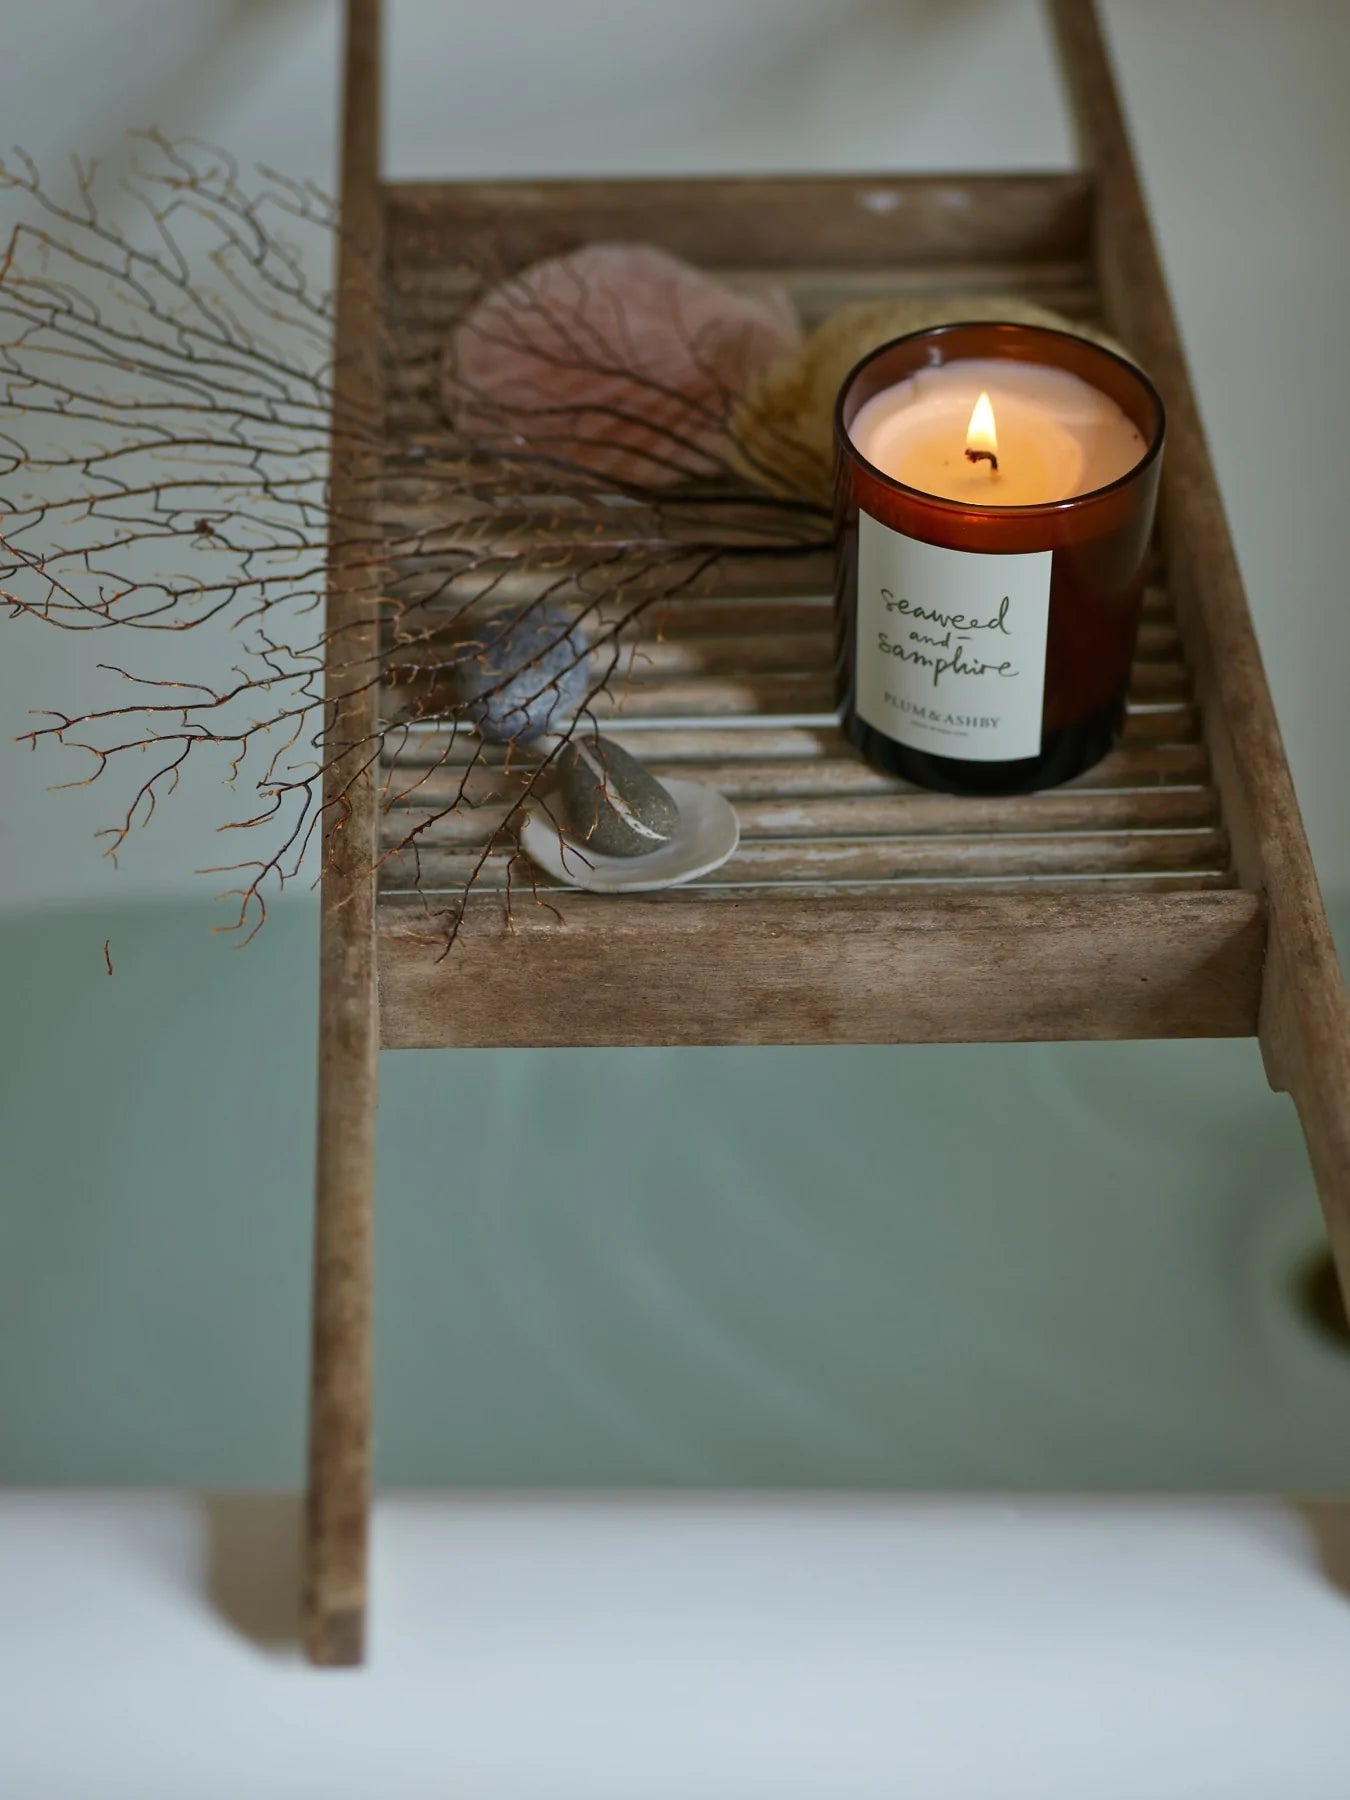 Plum and Ashby Candle : SEAWEED & SAMPHIRE